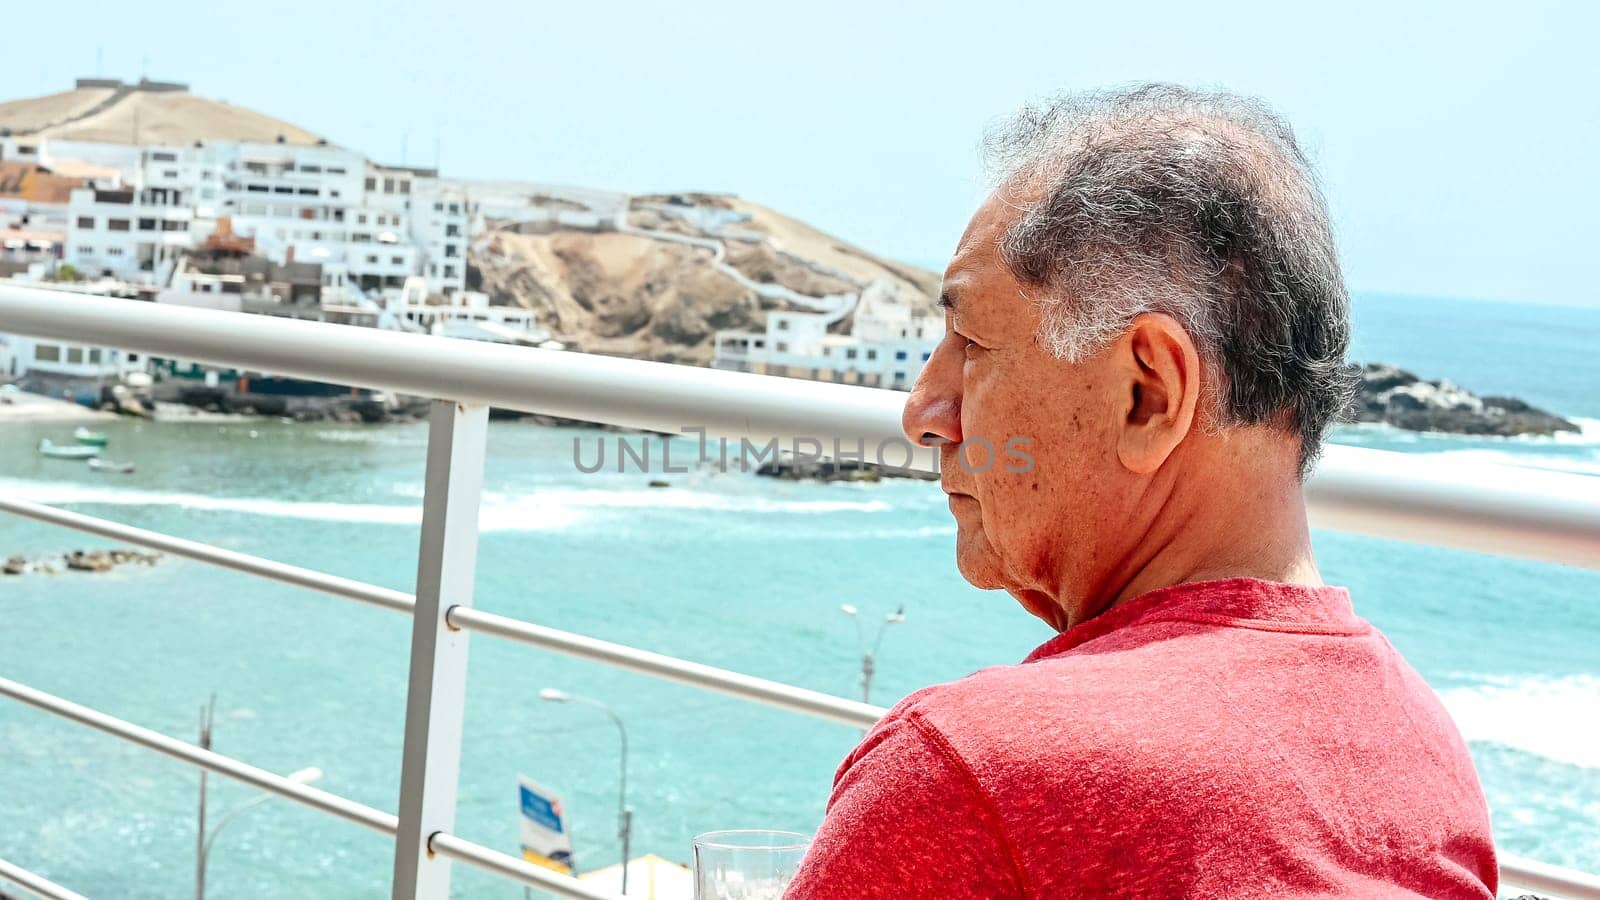 Mature man sitting on a balcony overlooking the sea with a cocktail